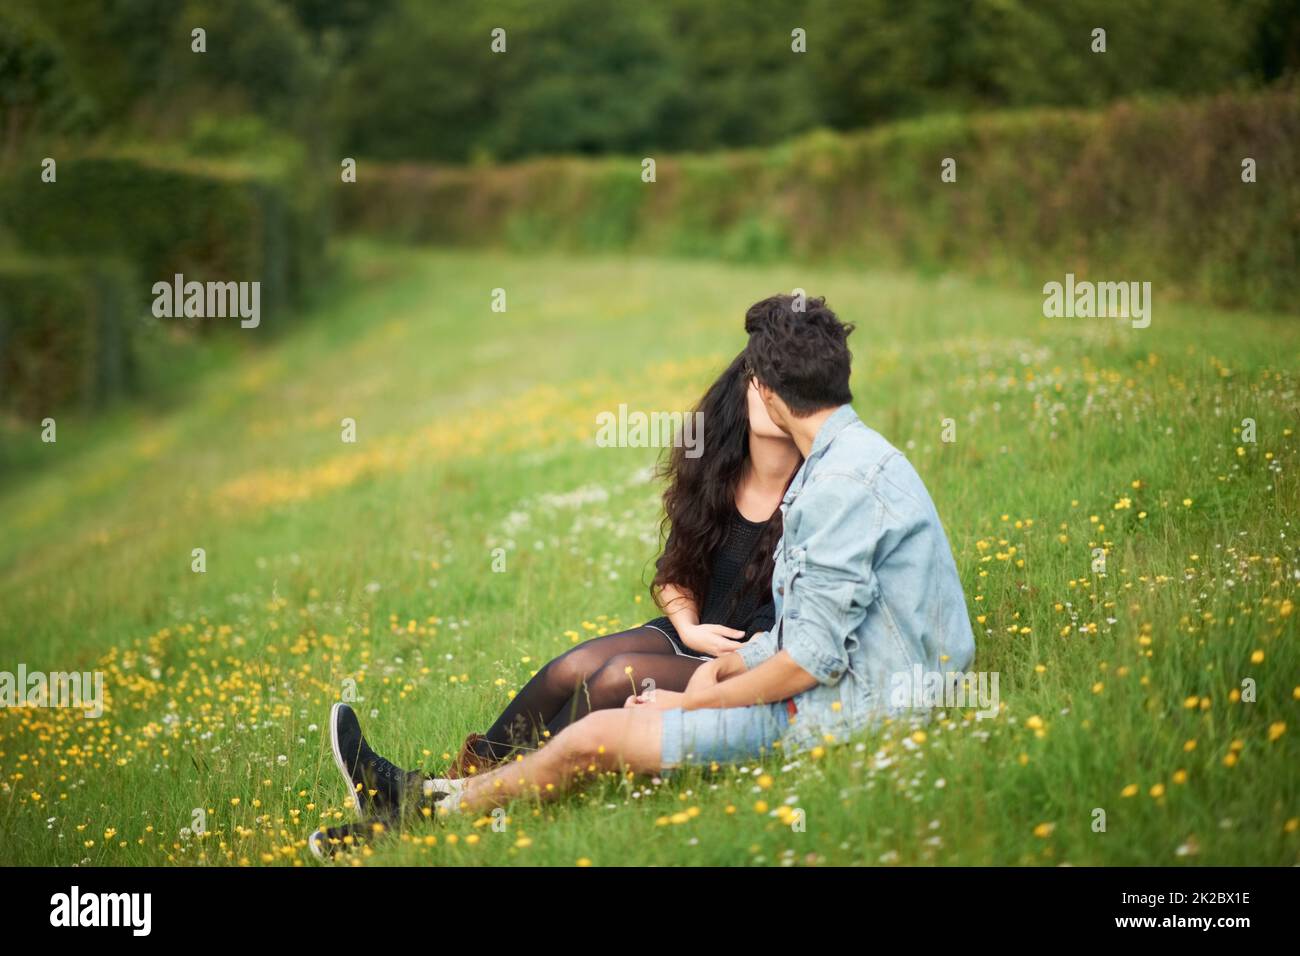 Springtime romance. Cute young couple sitting in a springtime field kissing. Stock Photo